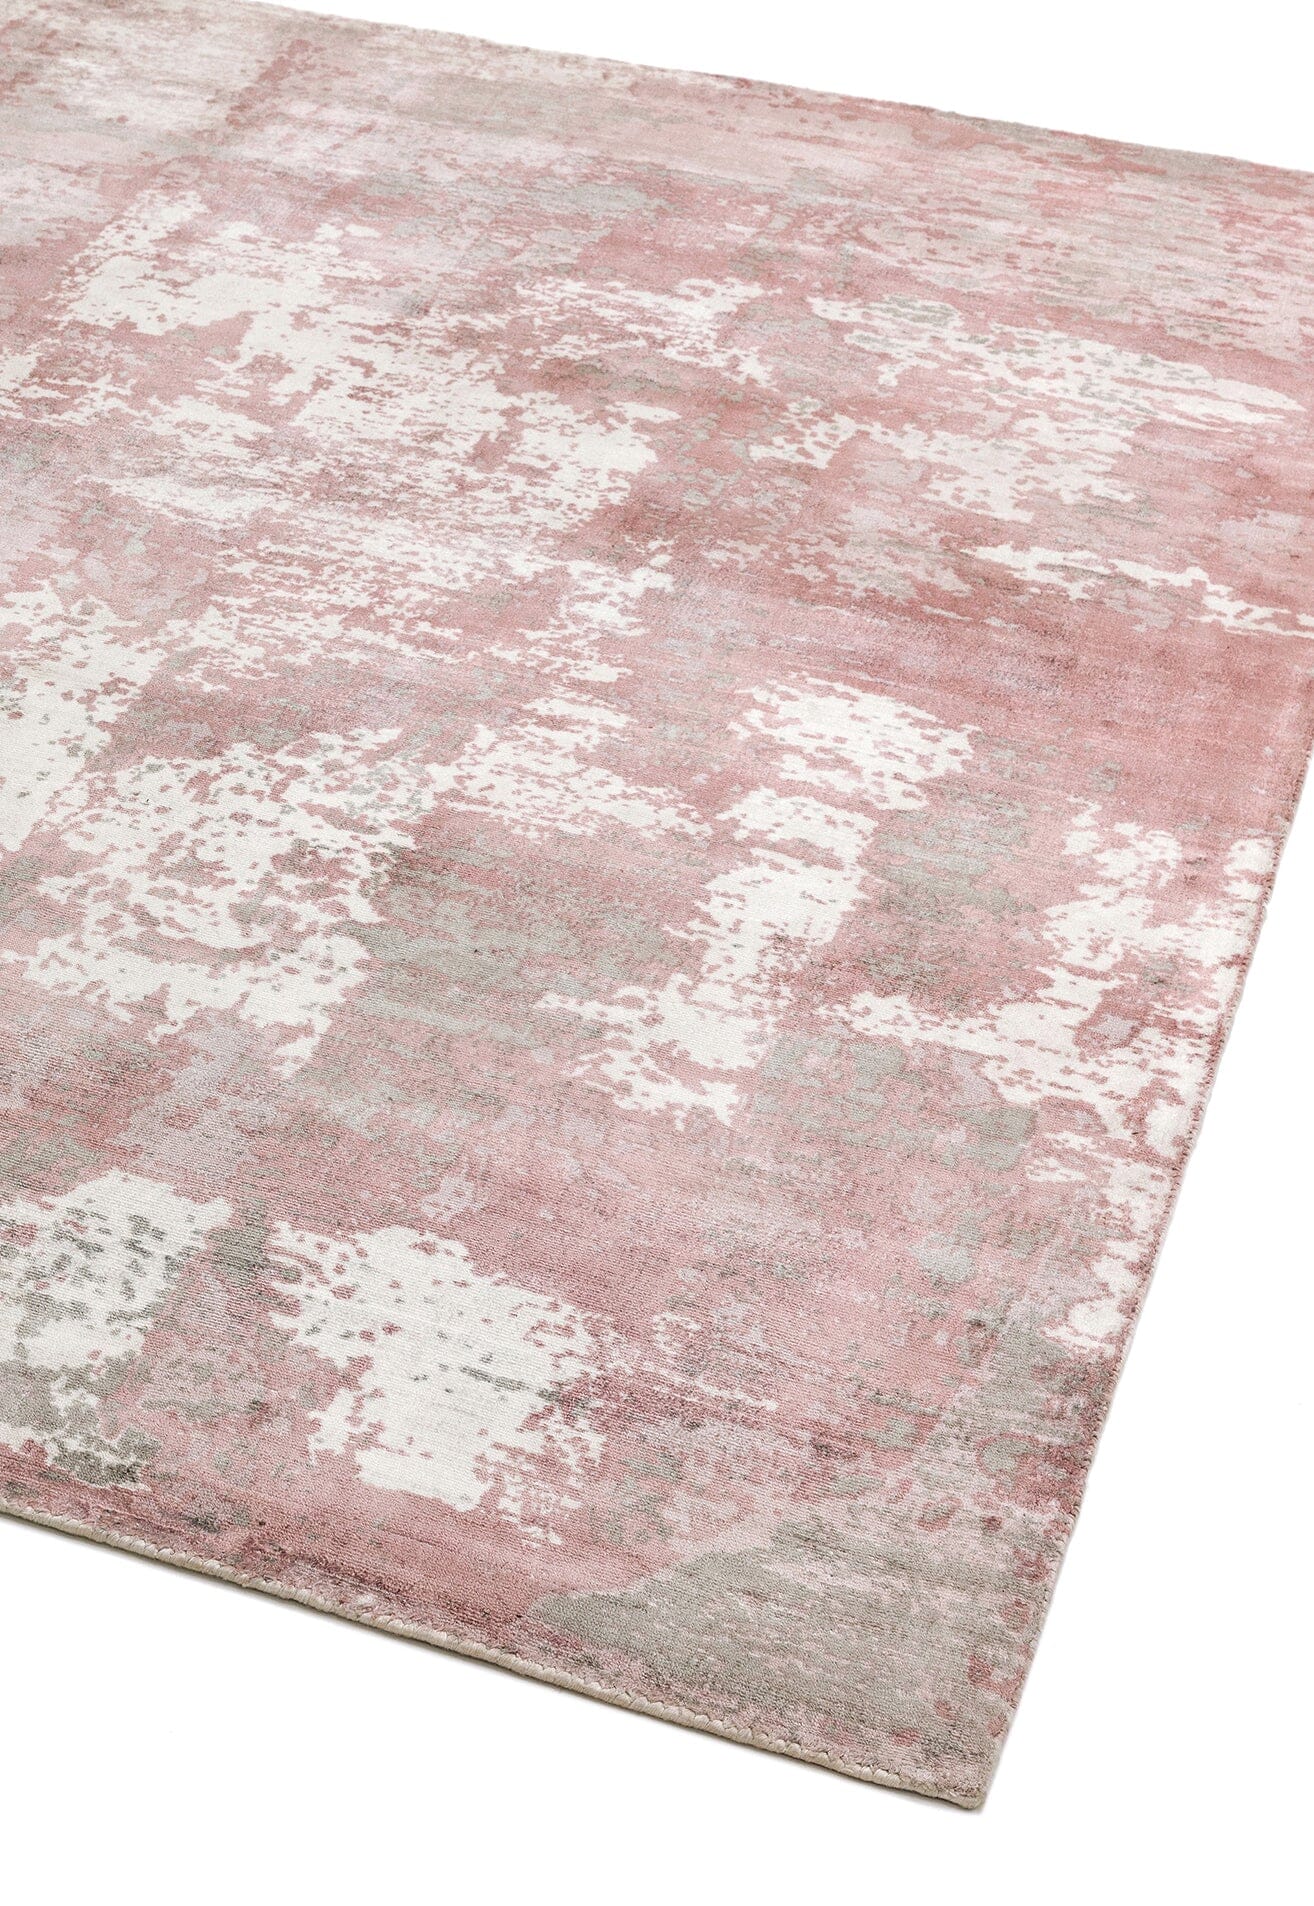  Asiatic Carpets-Asiatic Carpets Gatsby Hand Woven Rug Blush - 120 x 170cm-Pink 037 